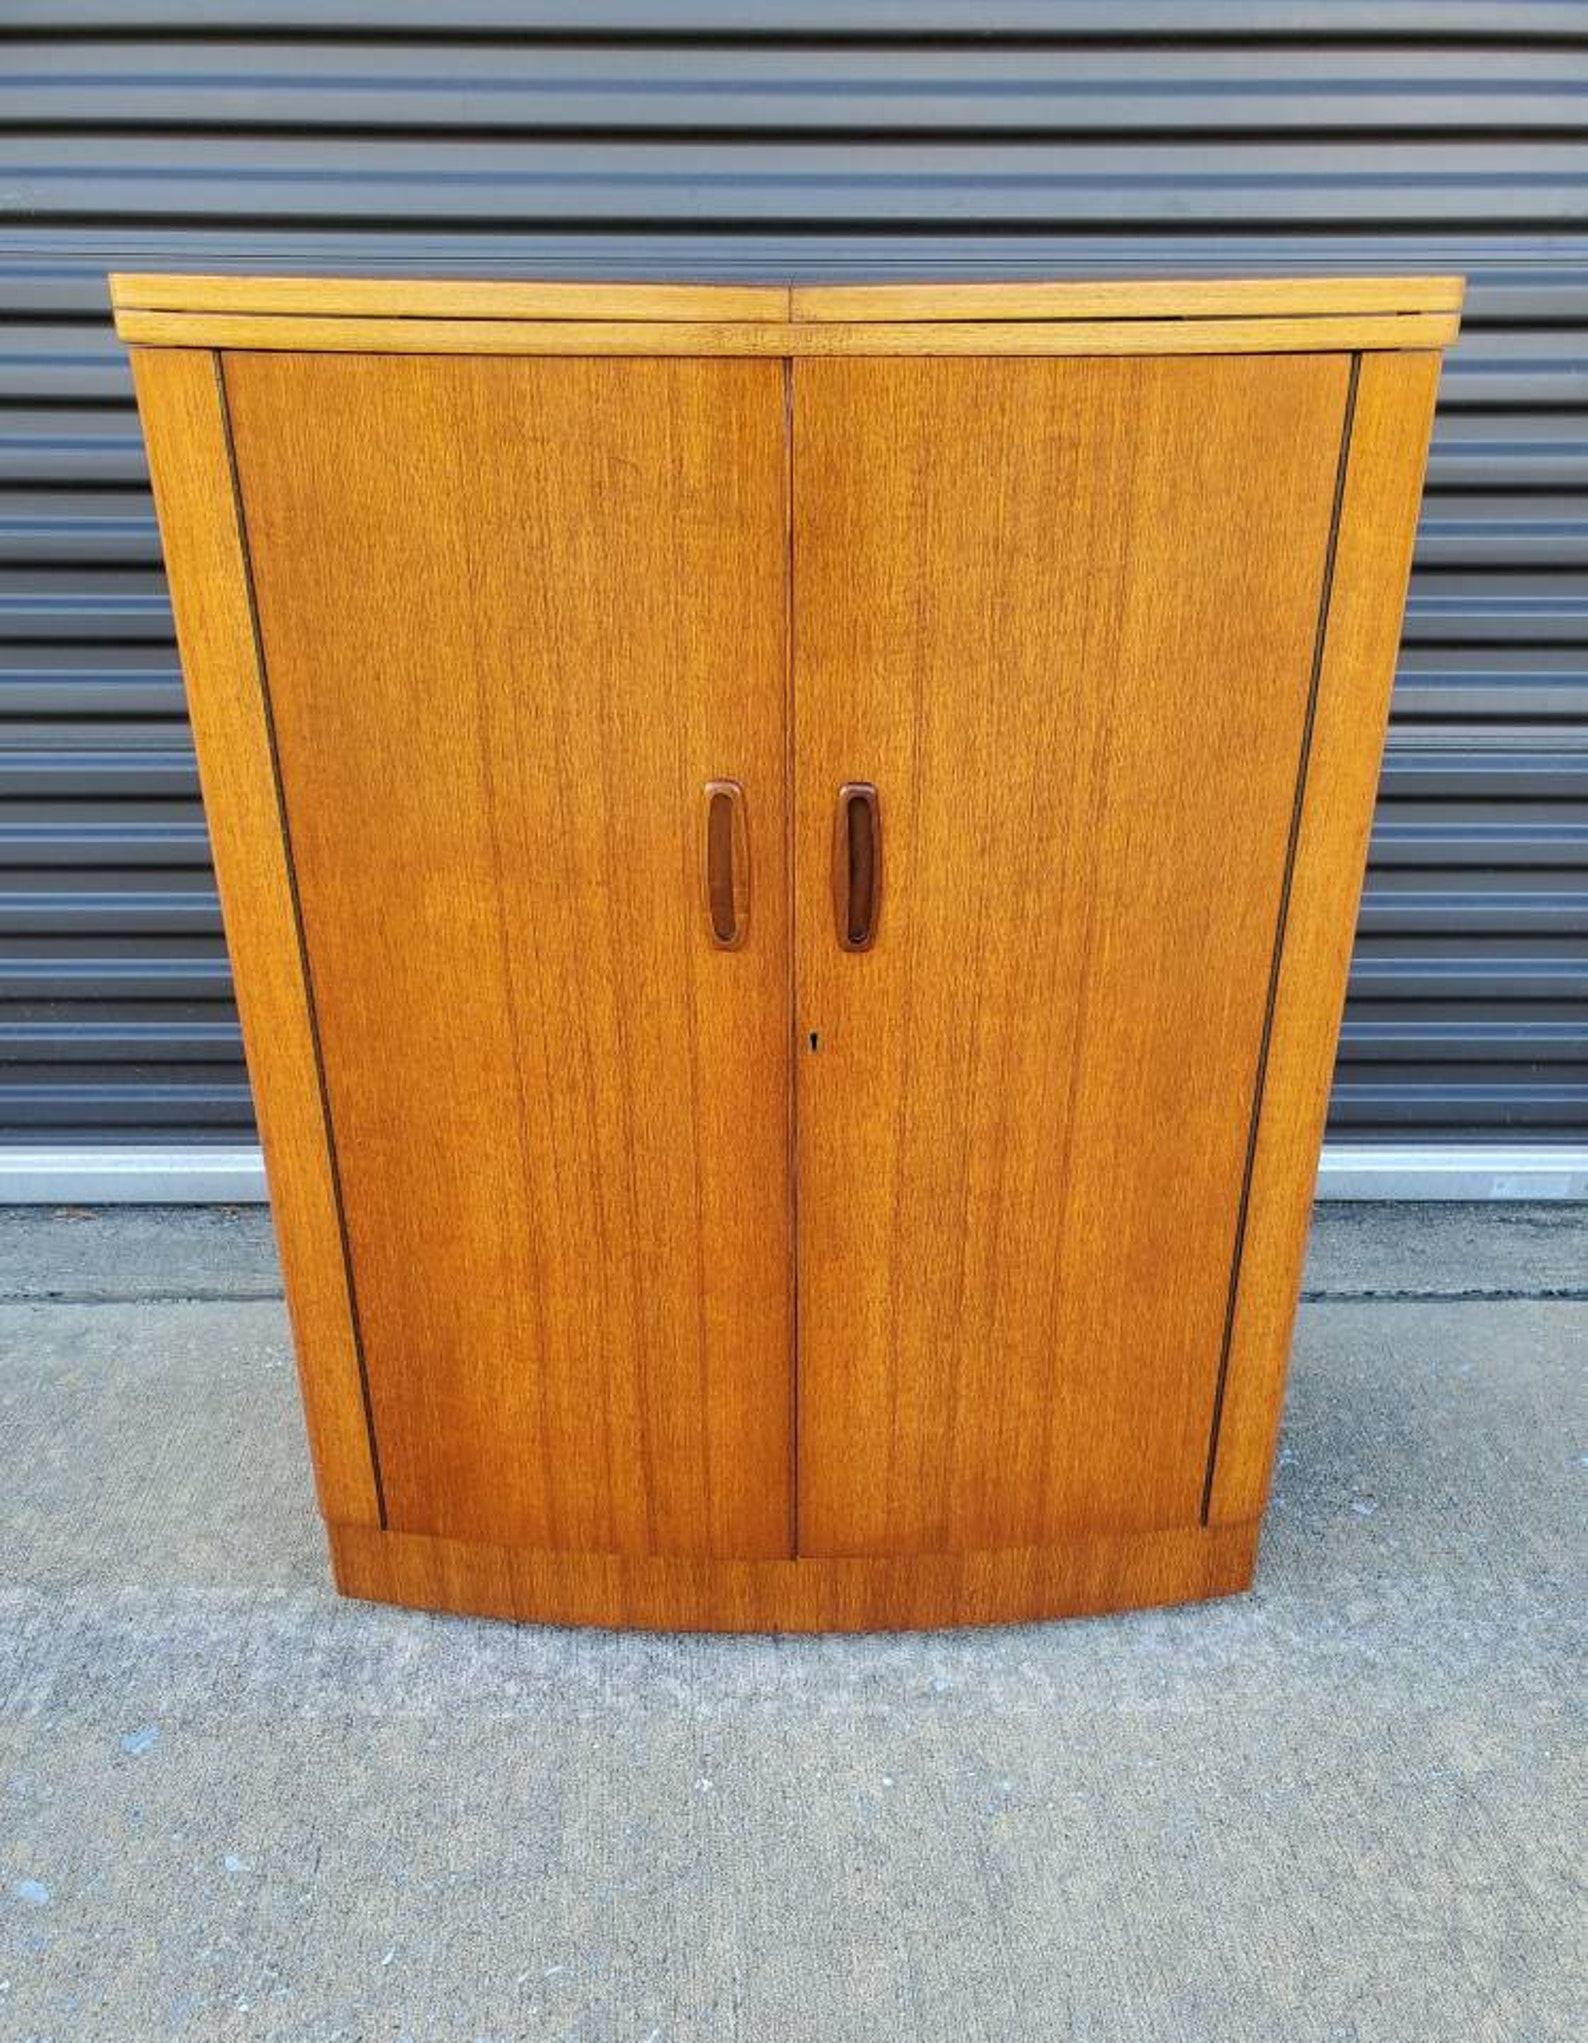 A fabulous British Danish designed Mid-Century Modern teak liquor cabinet dry bar by Turnidge of London. Circa 1960

This signed, highly coveted morphing cocktail cabinet is a gorgeous space saving design that opens, two tone, the top unfolds and